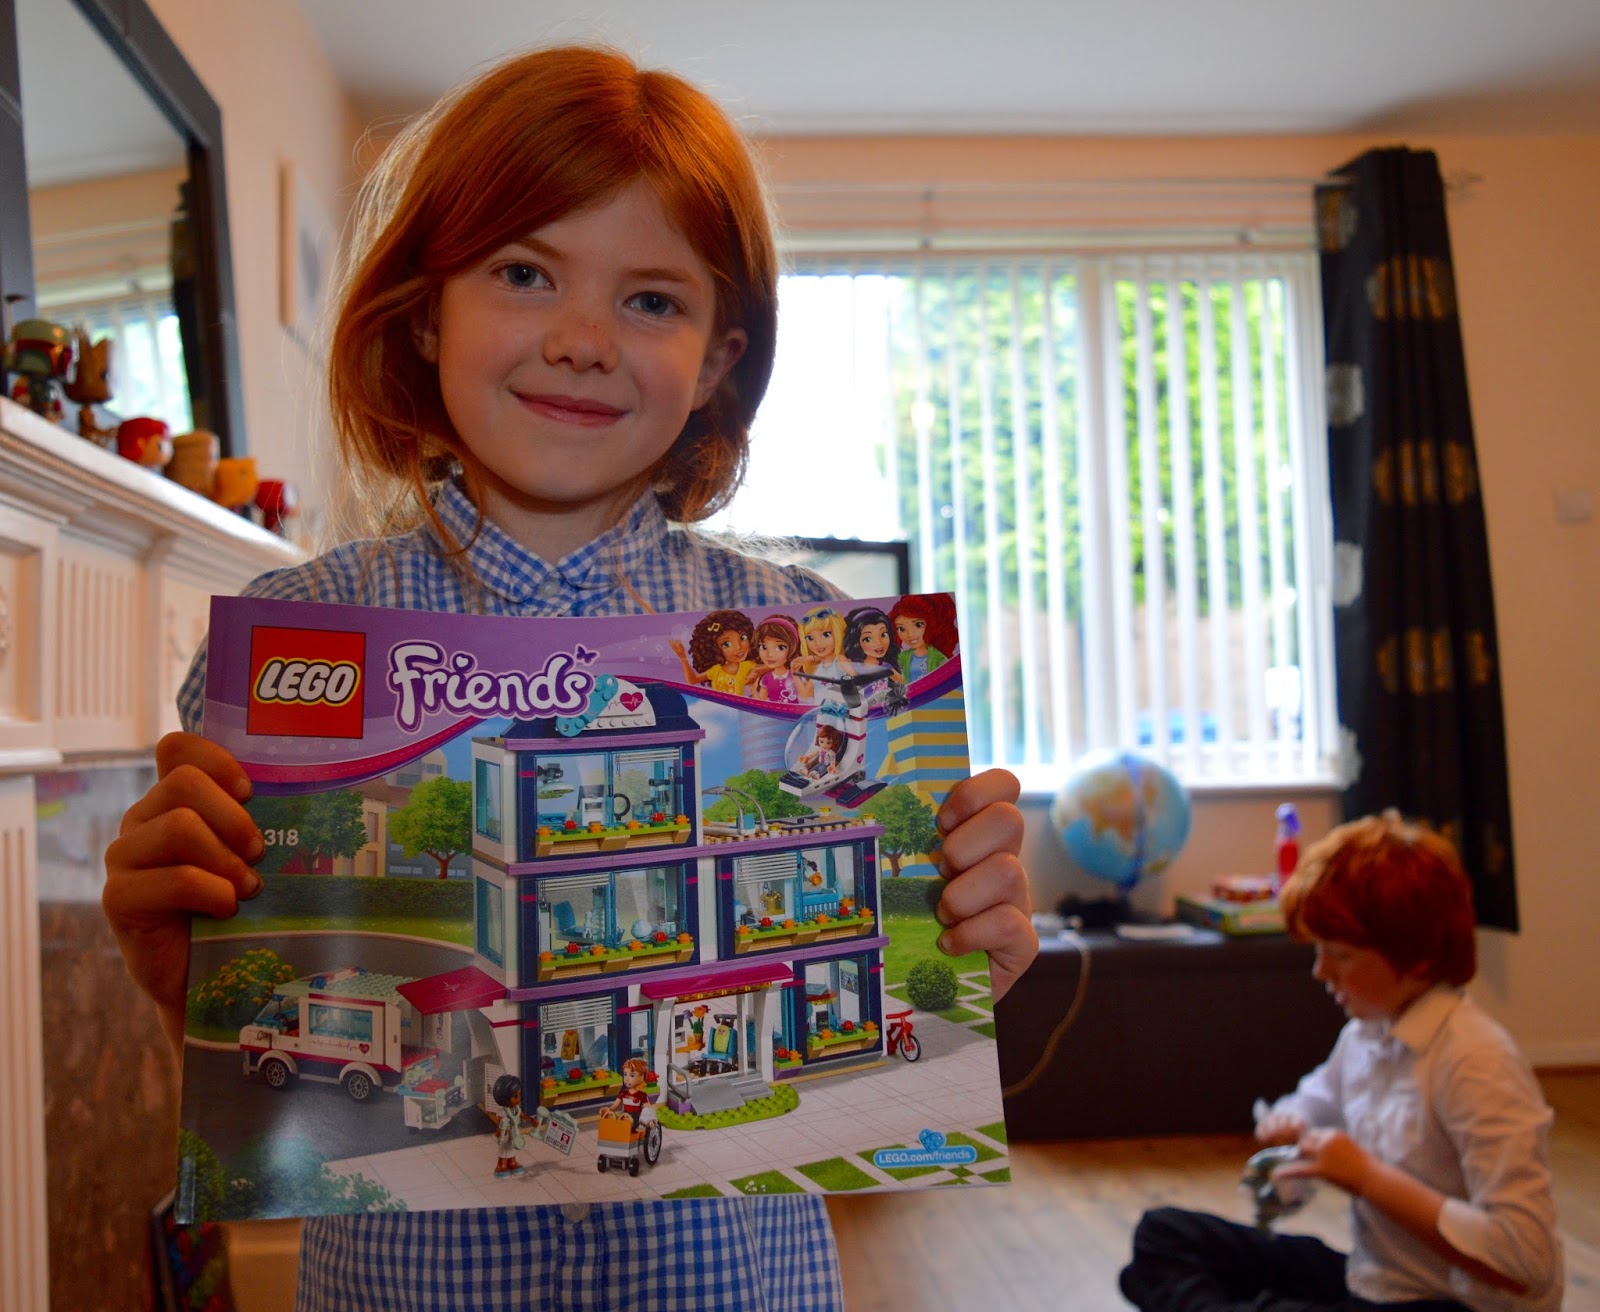 When are children ready for their first LEGO set? | East Family Fun